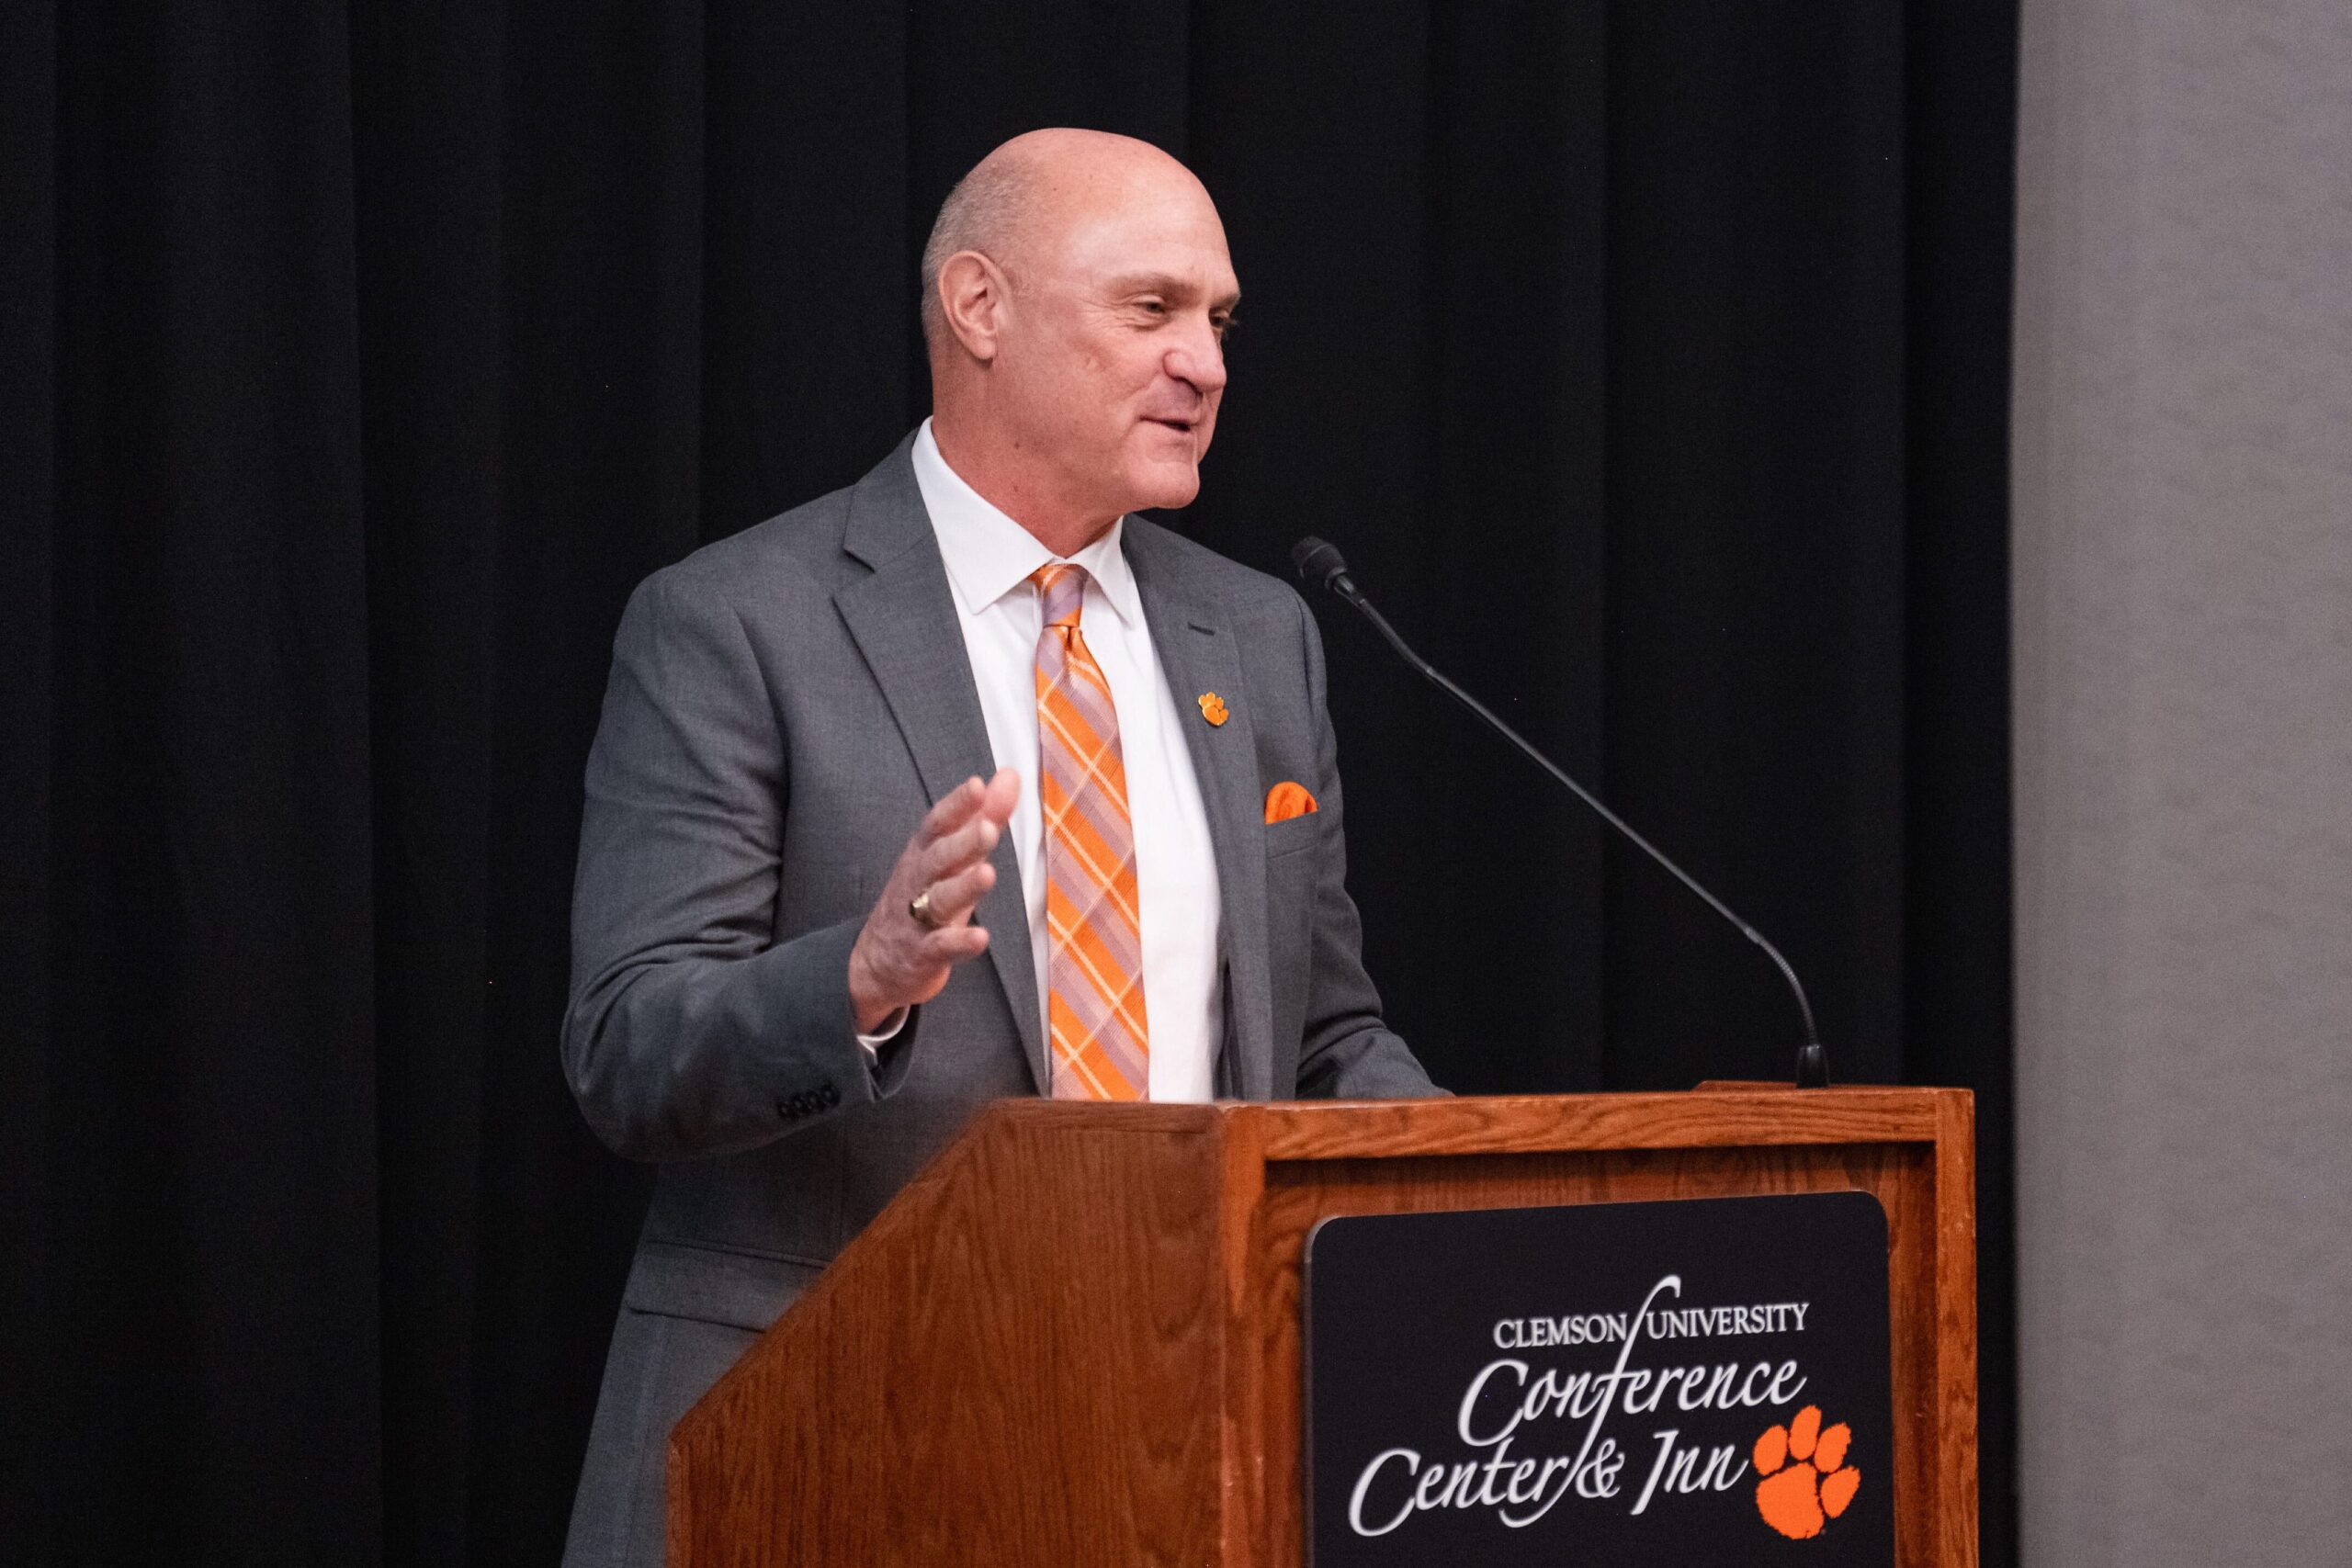 Clemson President Jim Clements speaks at a podium at the Madren Center.